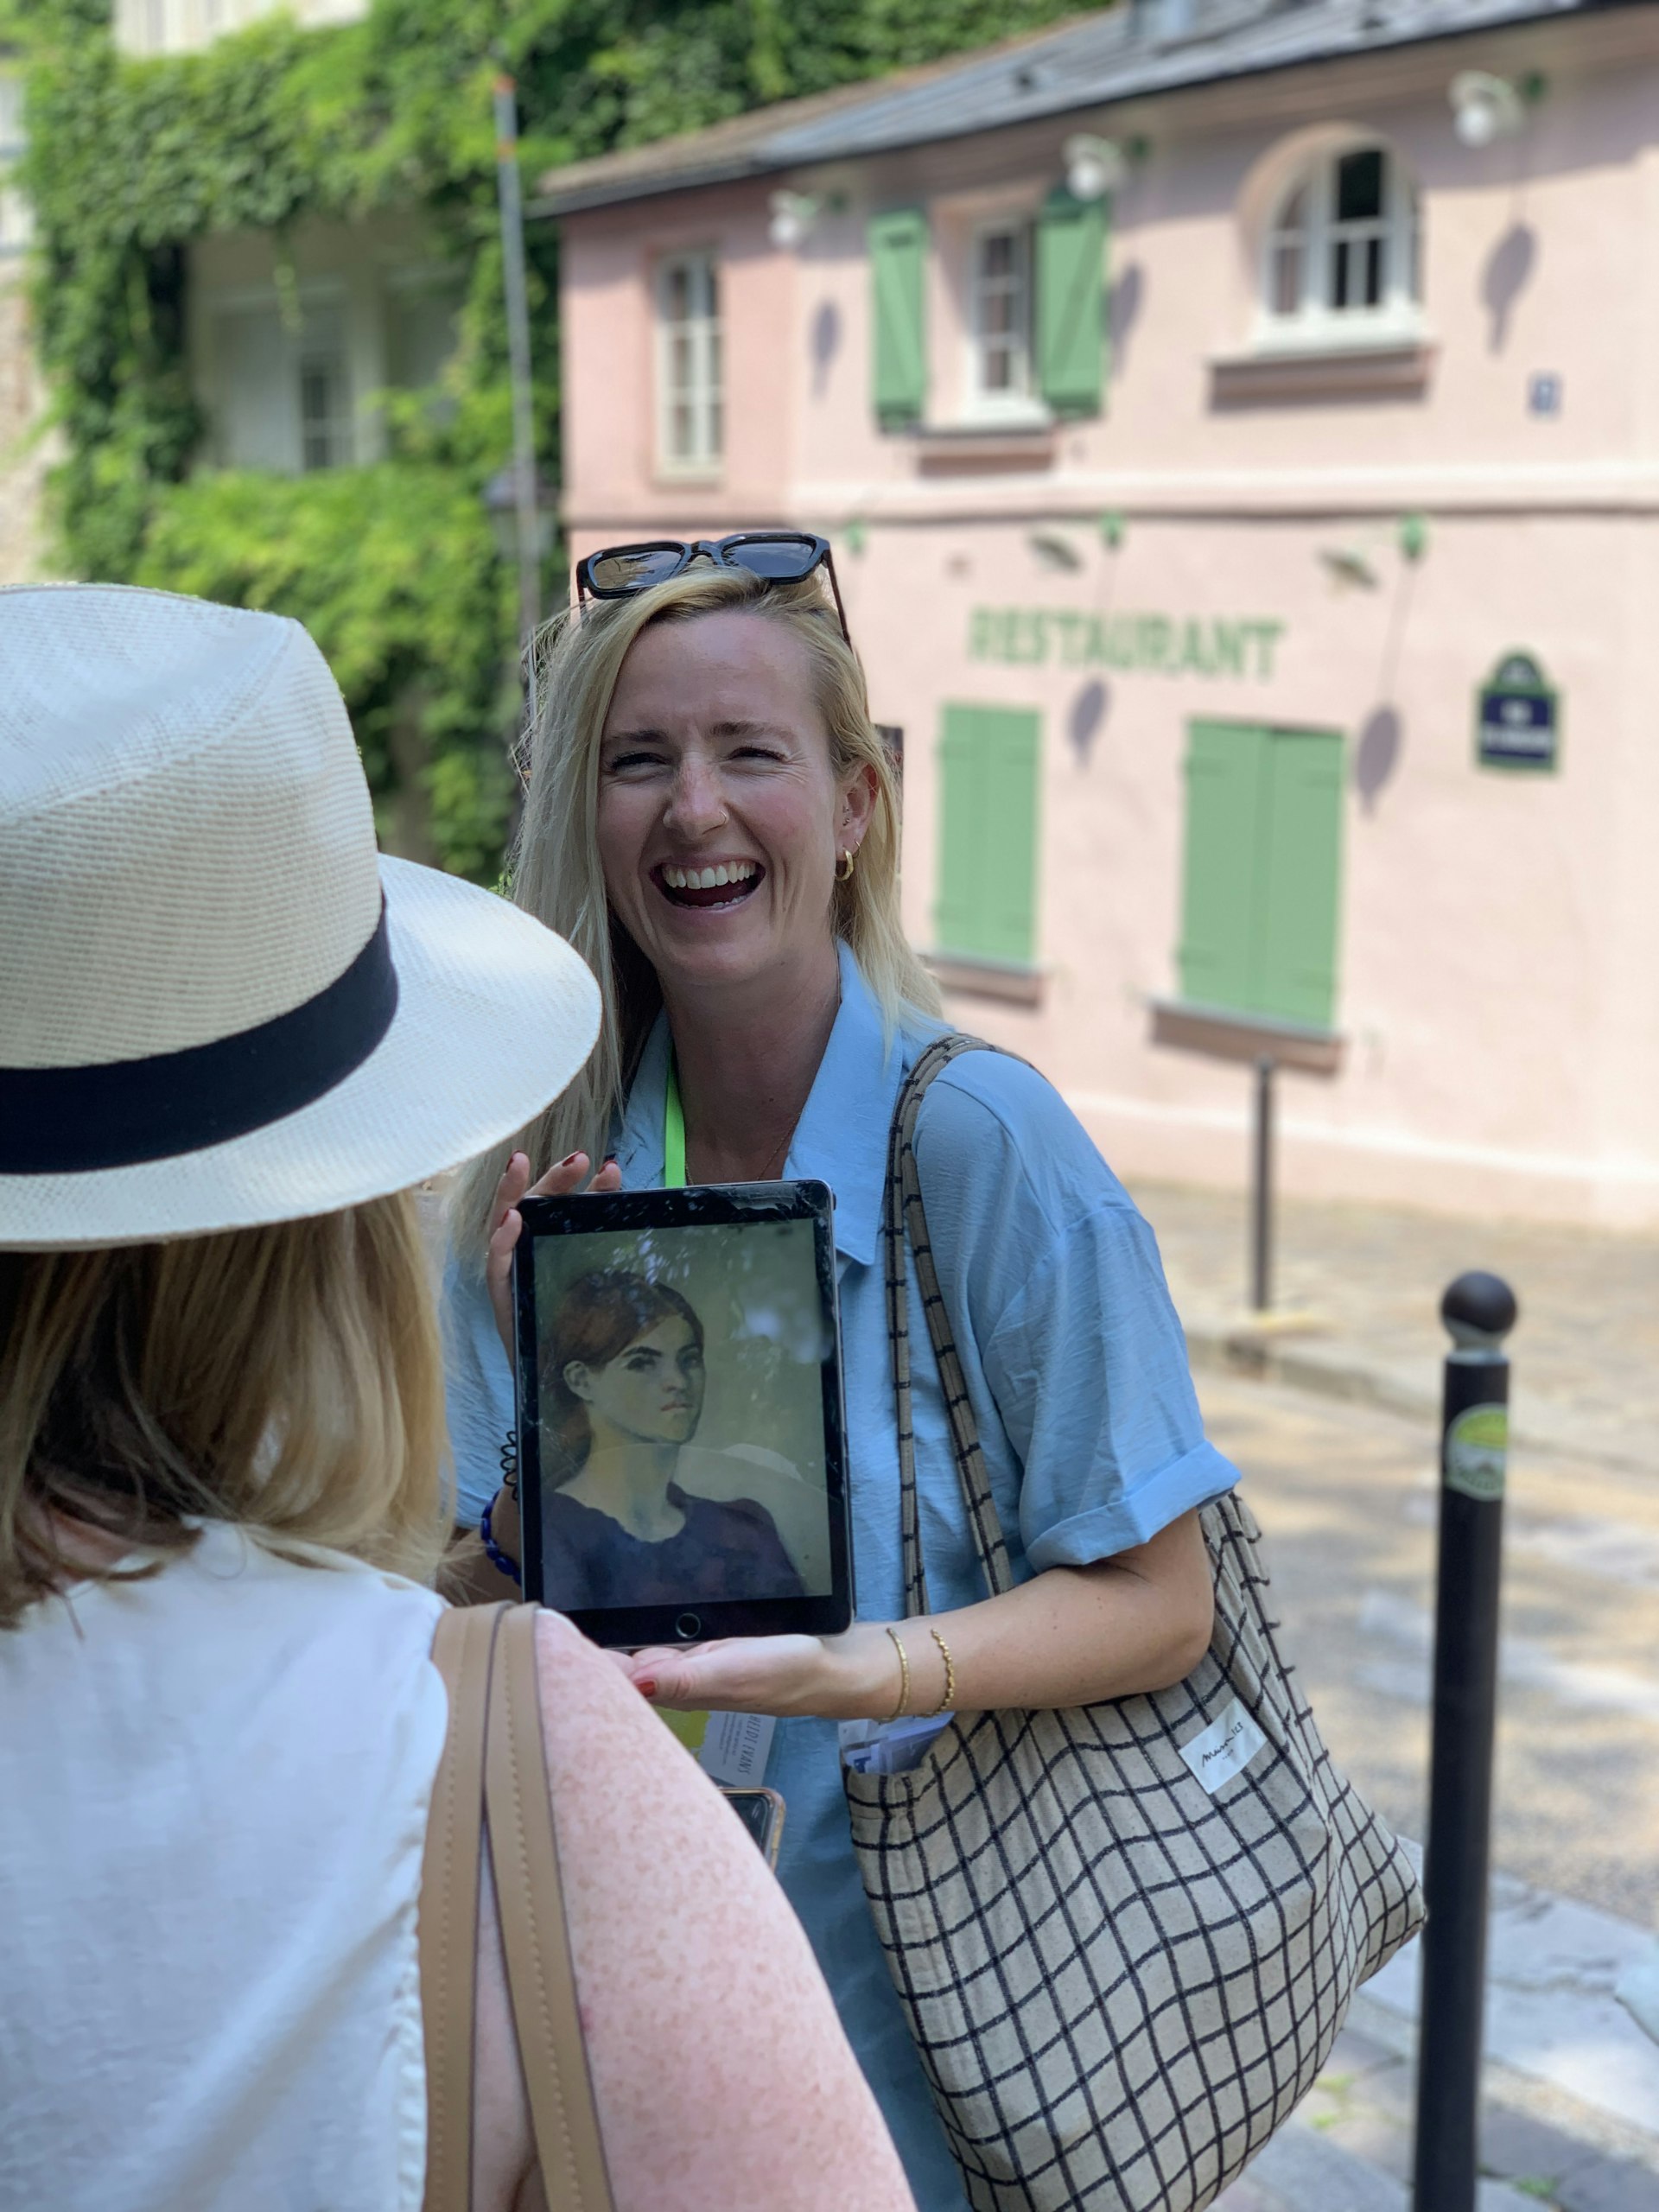 A tour guide smiles as she tells a story about the woman in the picture she is holding